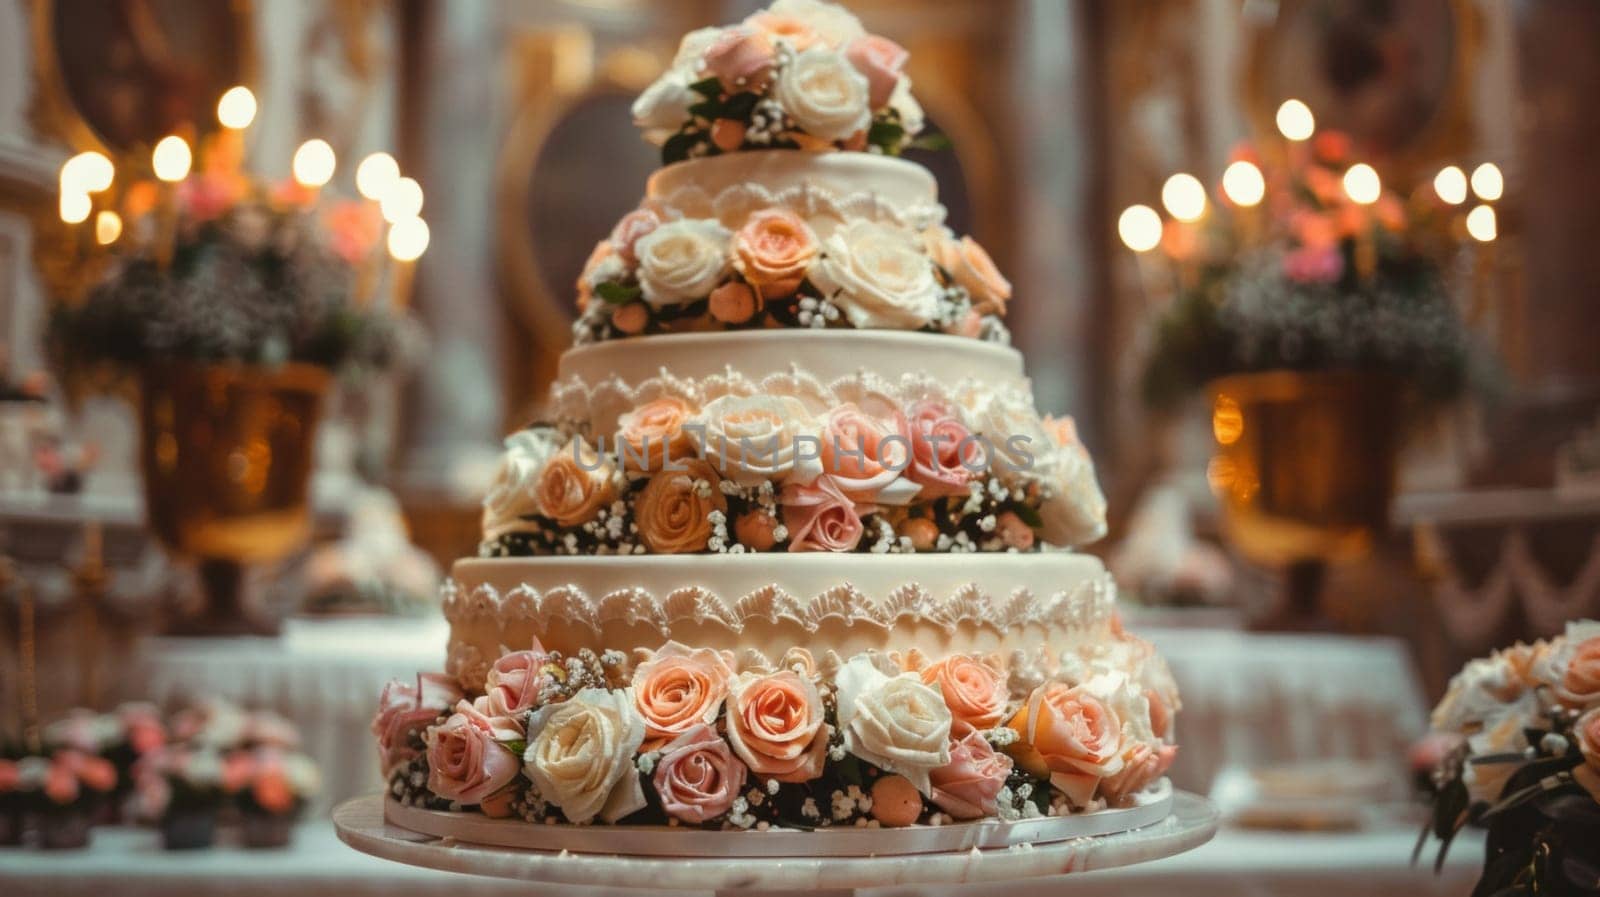 A large wedding cake with many layers of flowers on top